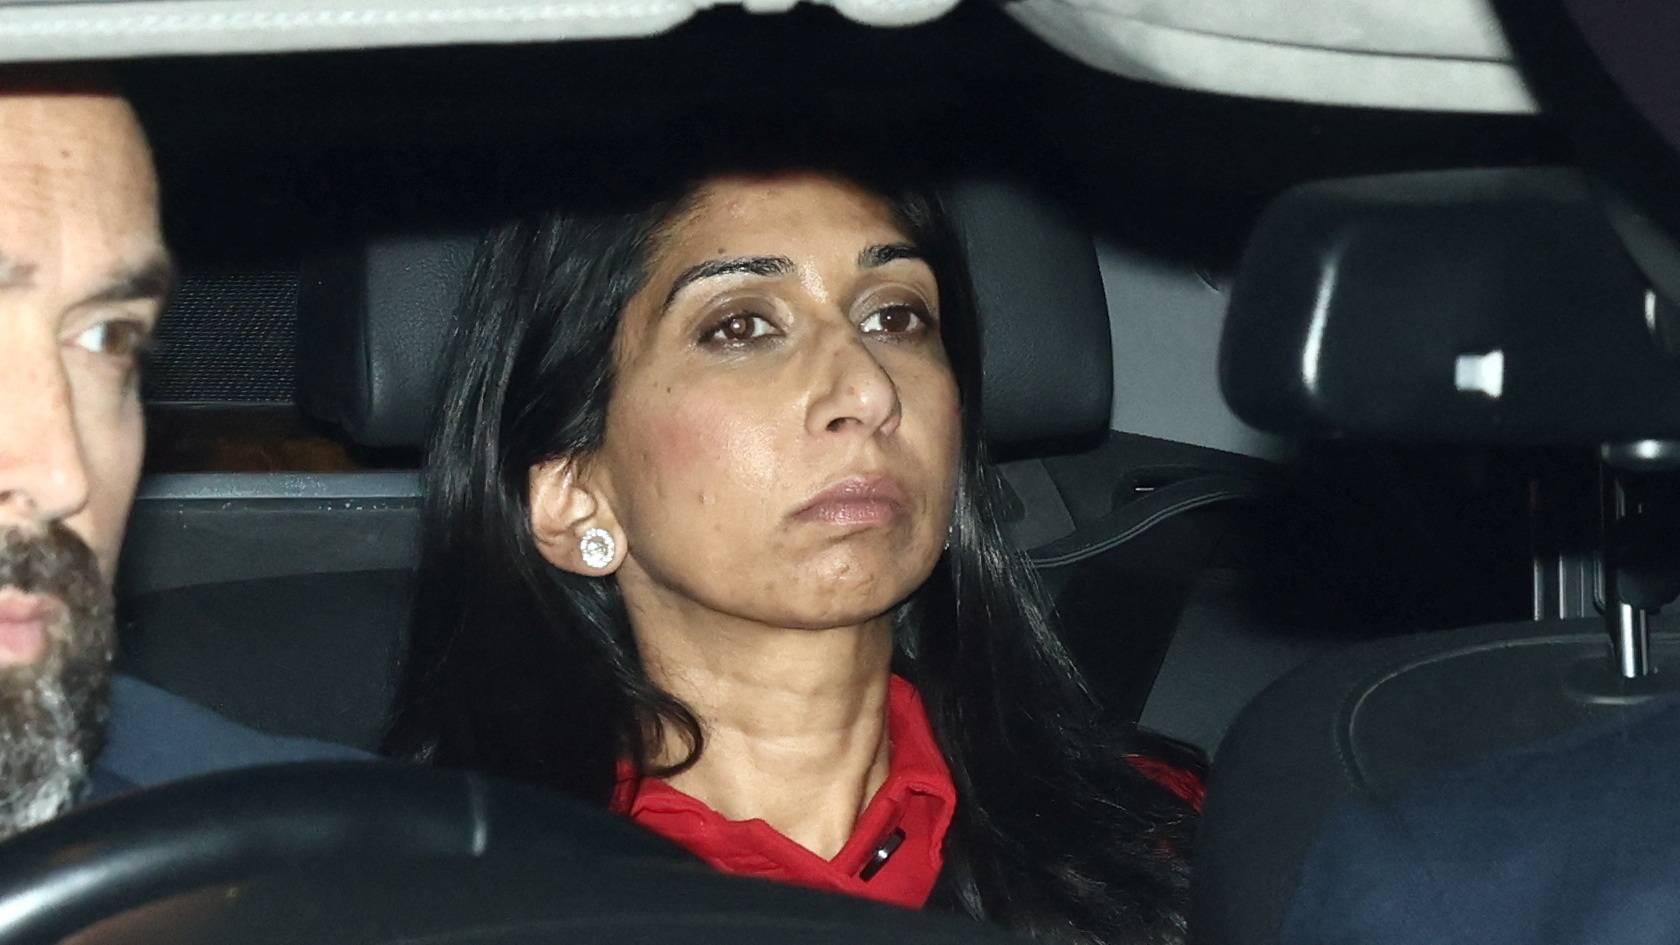 UK Interior Minister Suella Braverman arrives at the Houses of Parliament ahead of making her incendiary remarks to MPs. /Henry Nicholls/Reuters